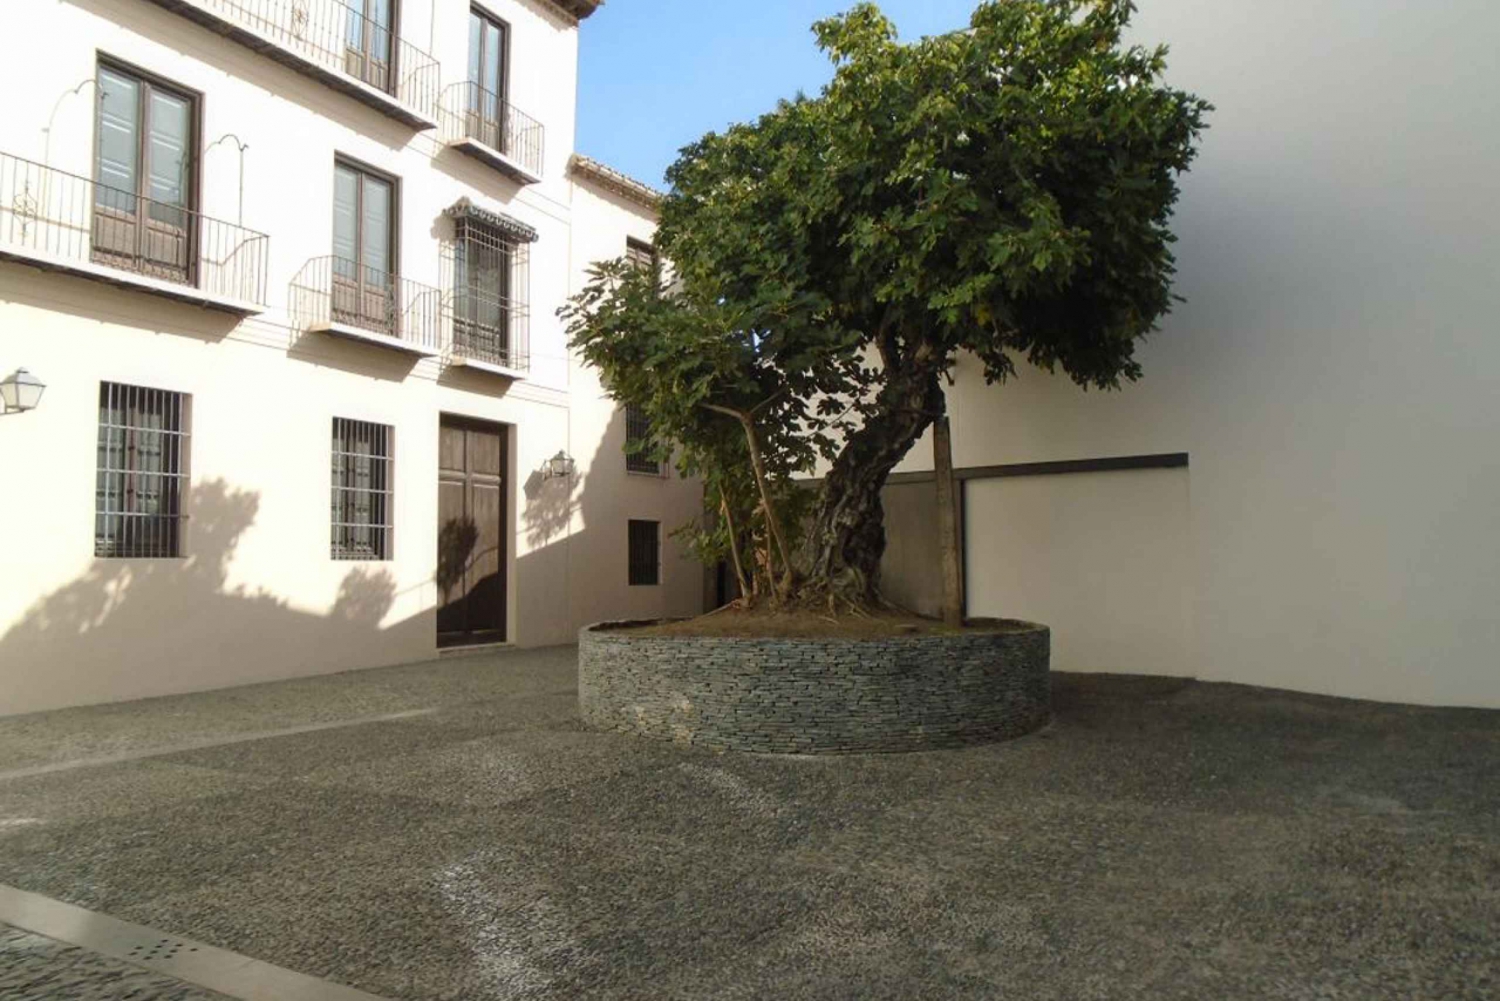 Malaga: Picasso Museum Guided Tour with Skip-the-Line Ticket